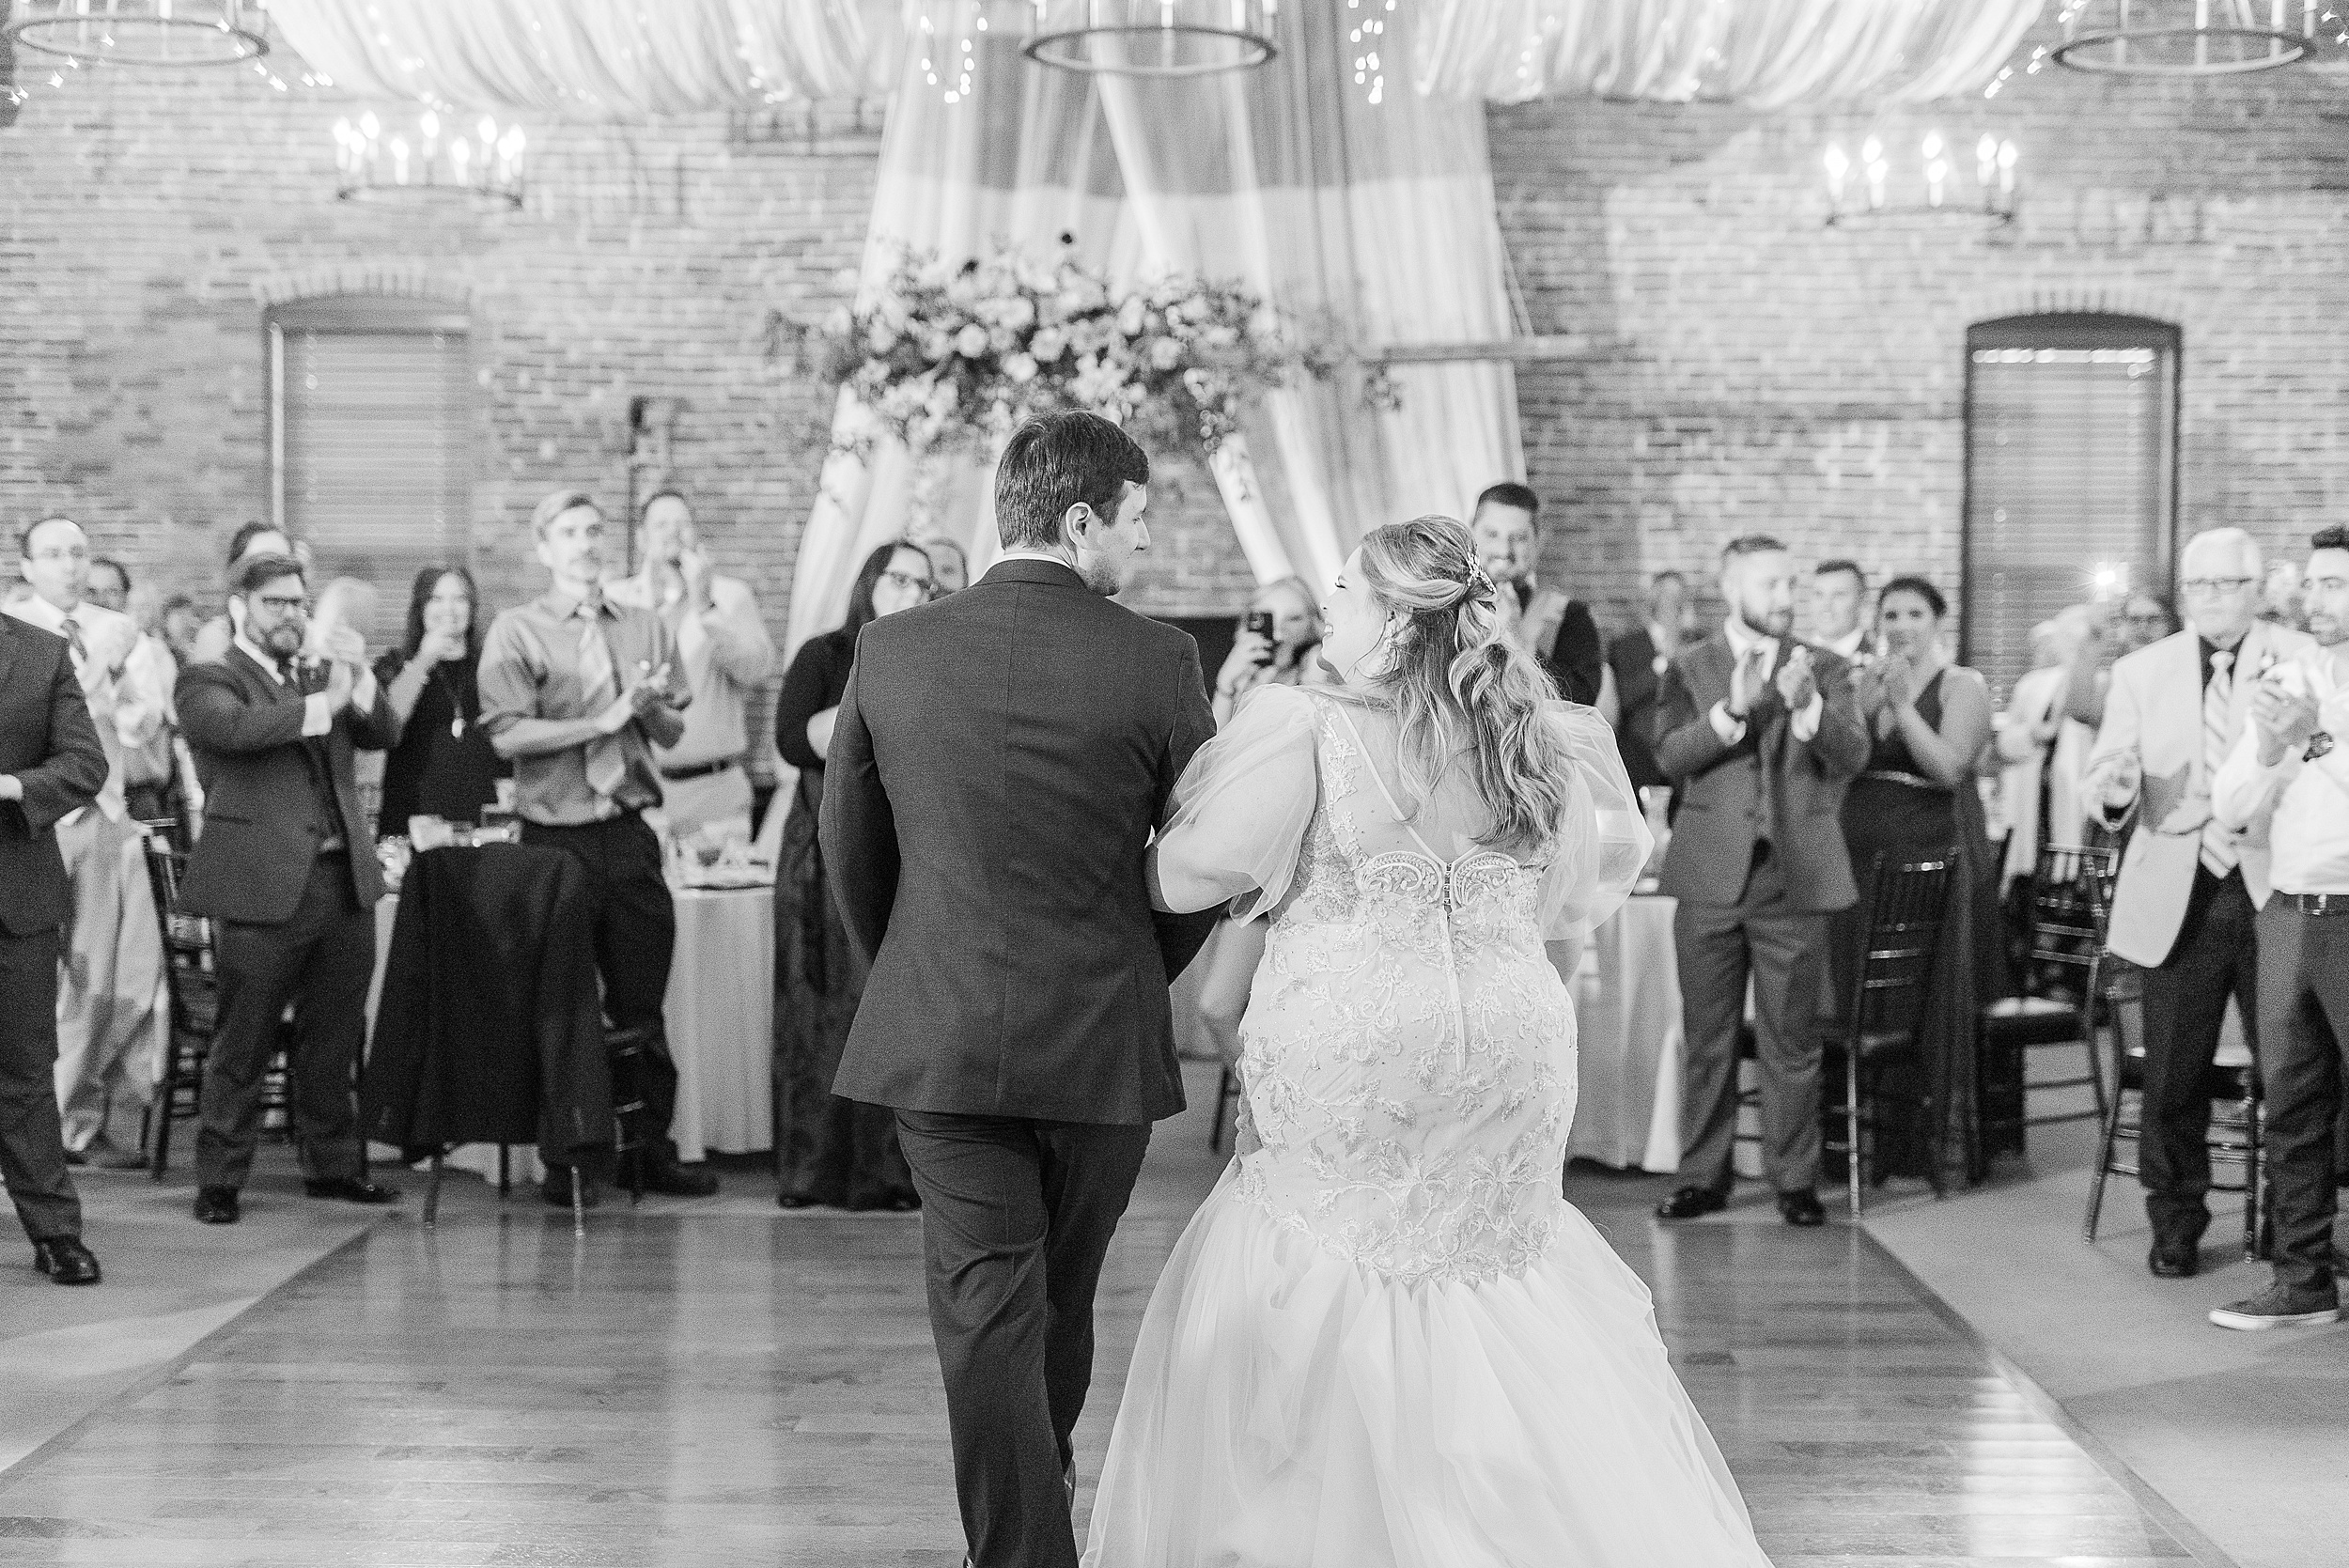 Newlyweds smile at each other while entering the dance floor for their first dance